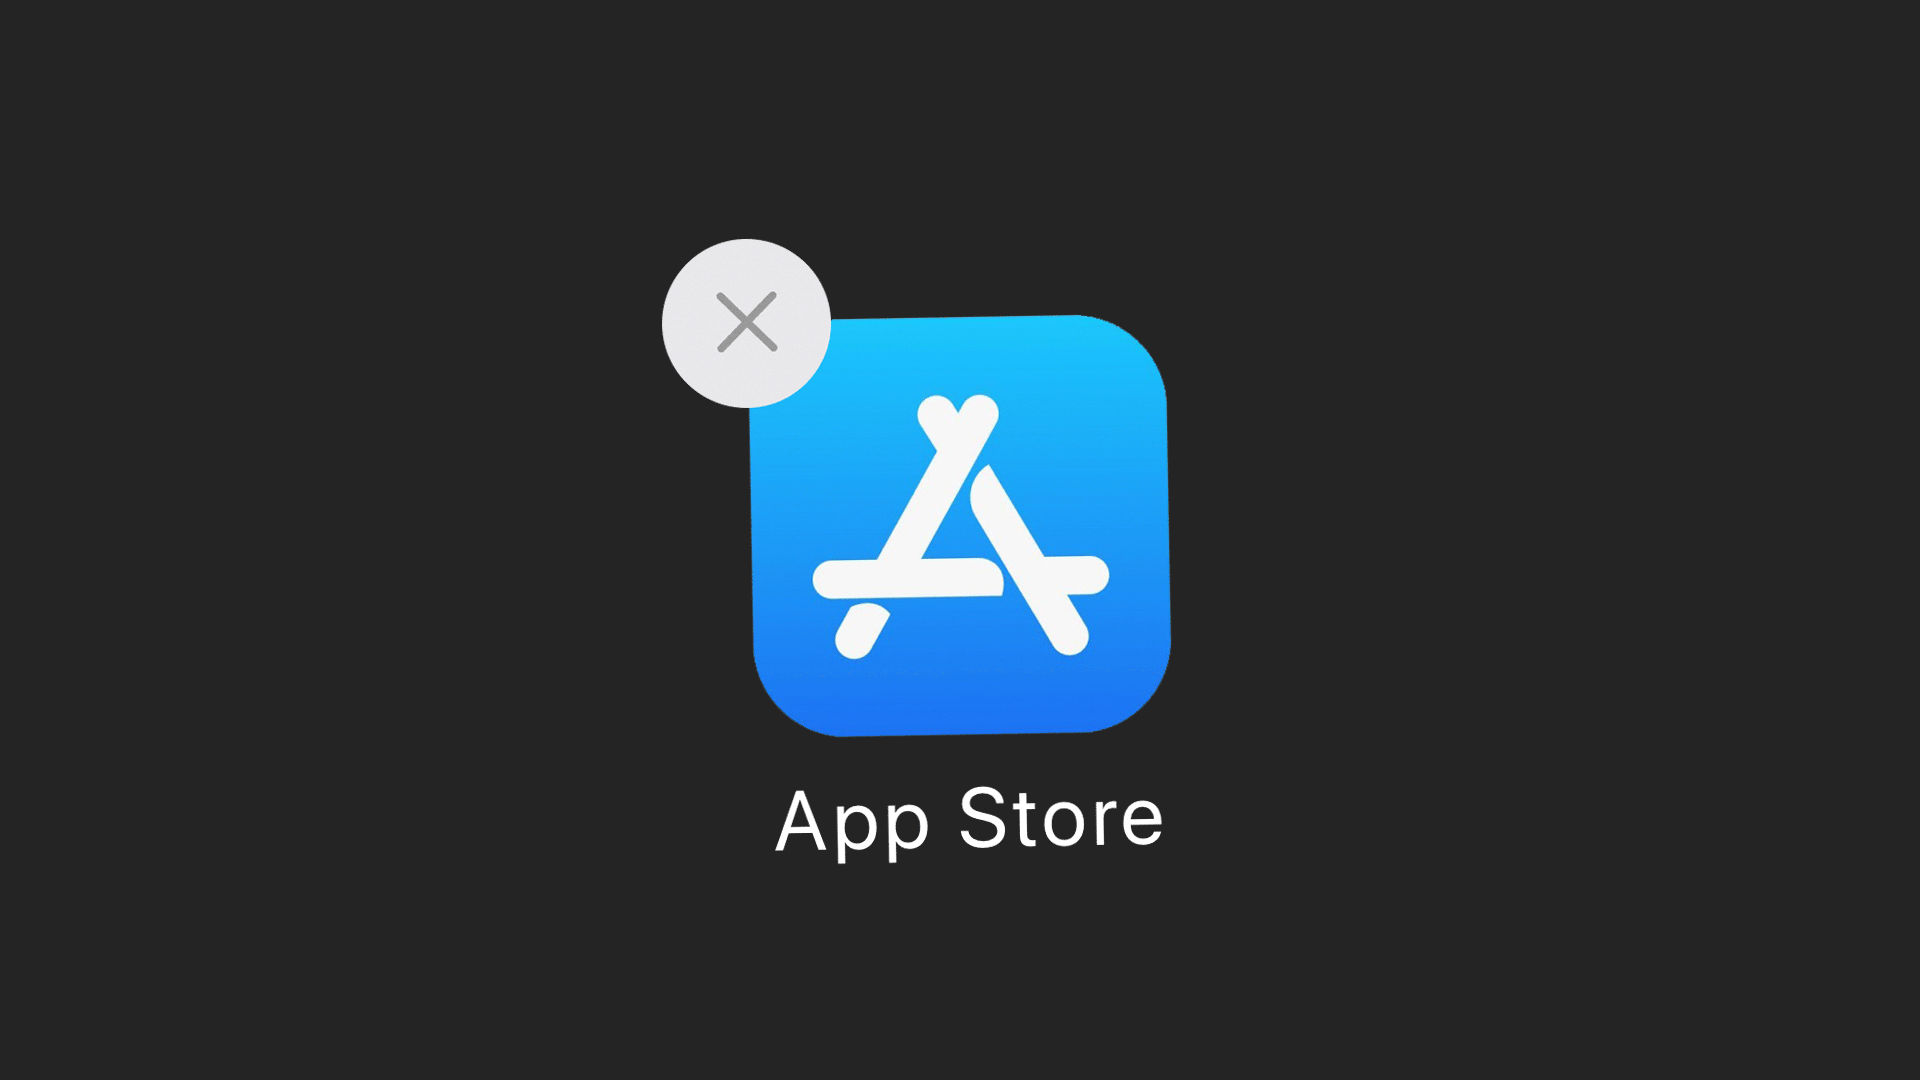 Illustration of App Store app about to be deleted